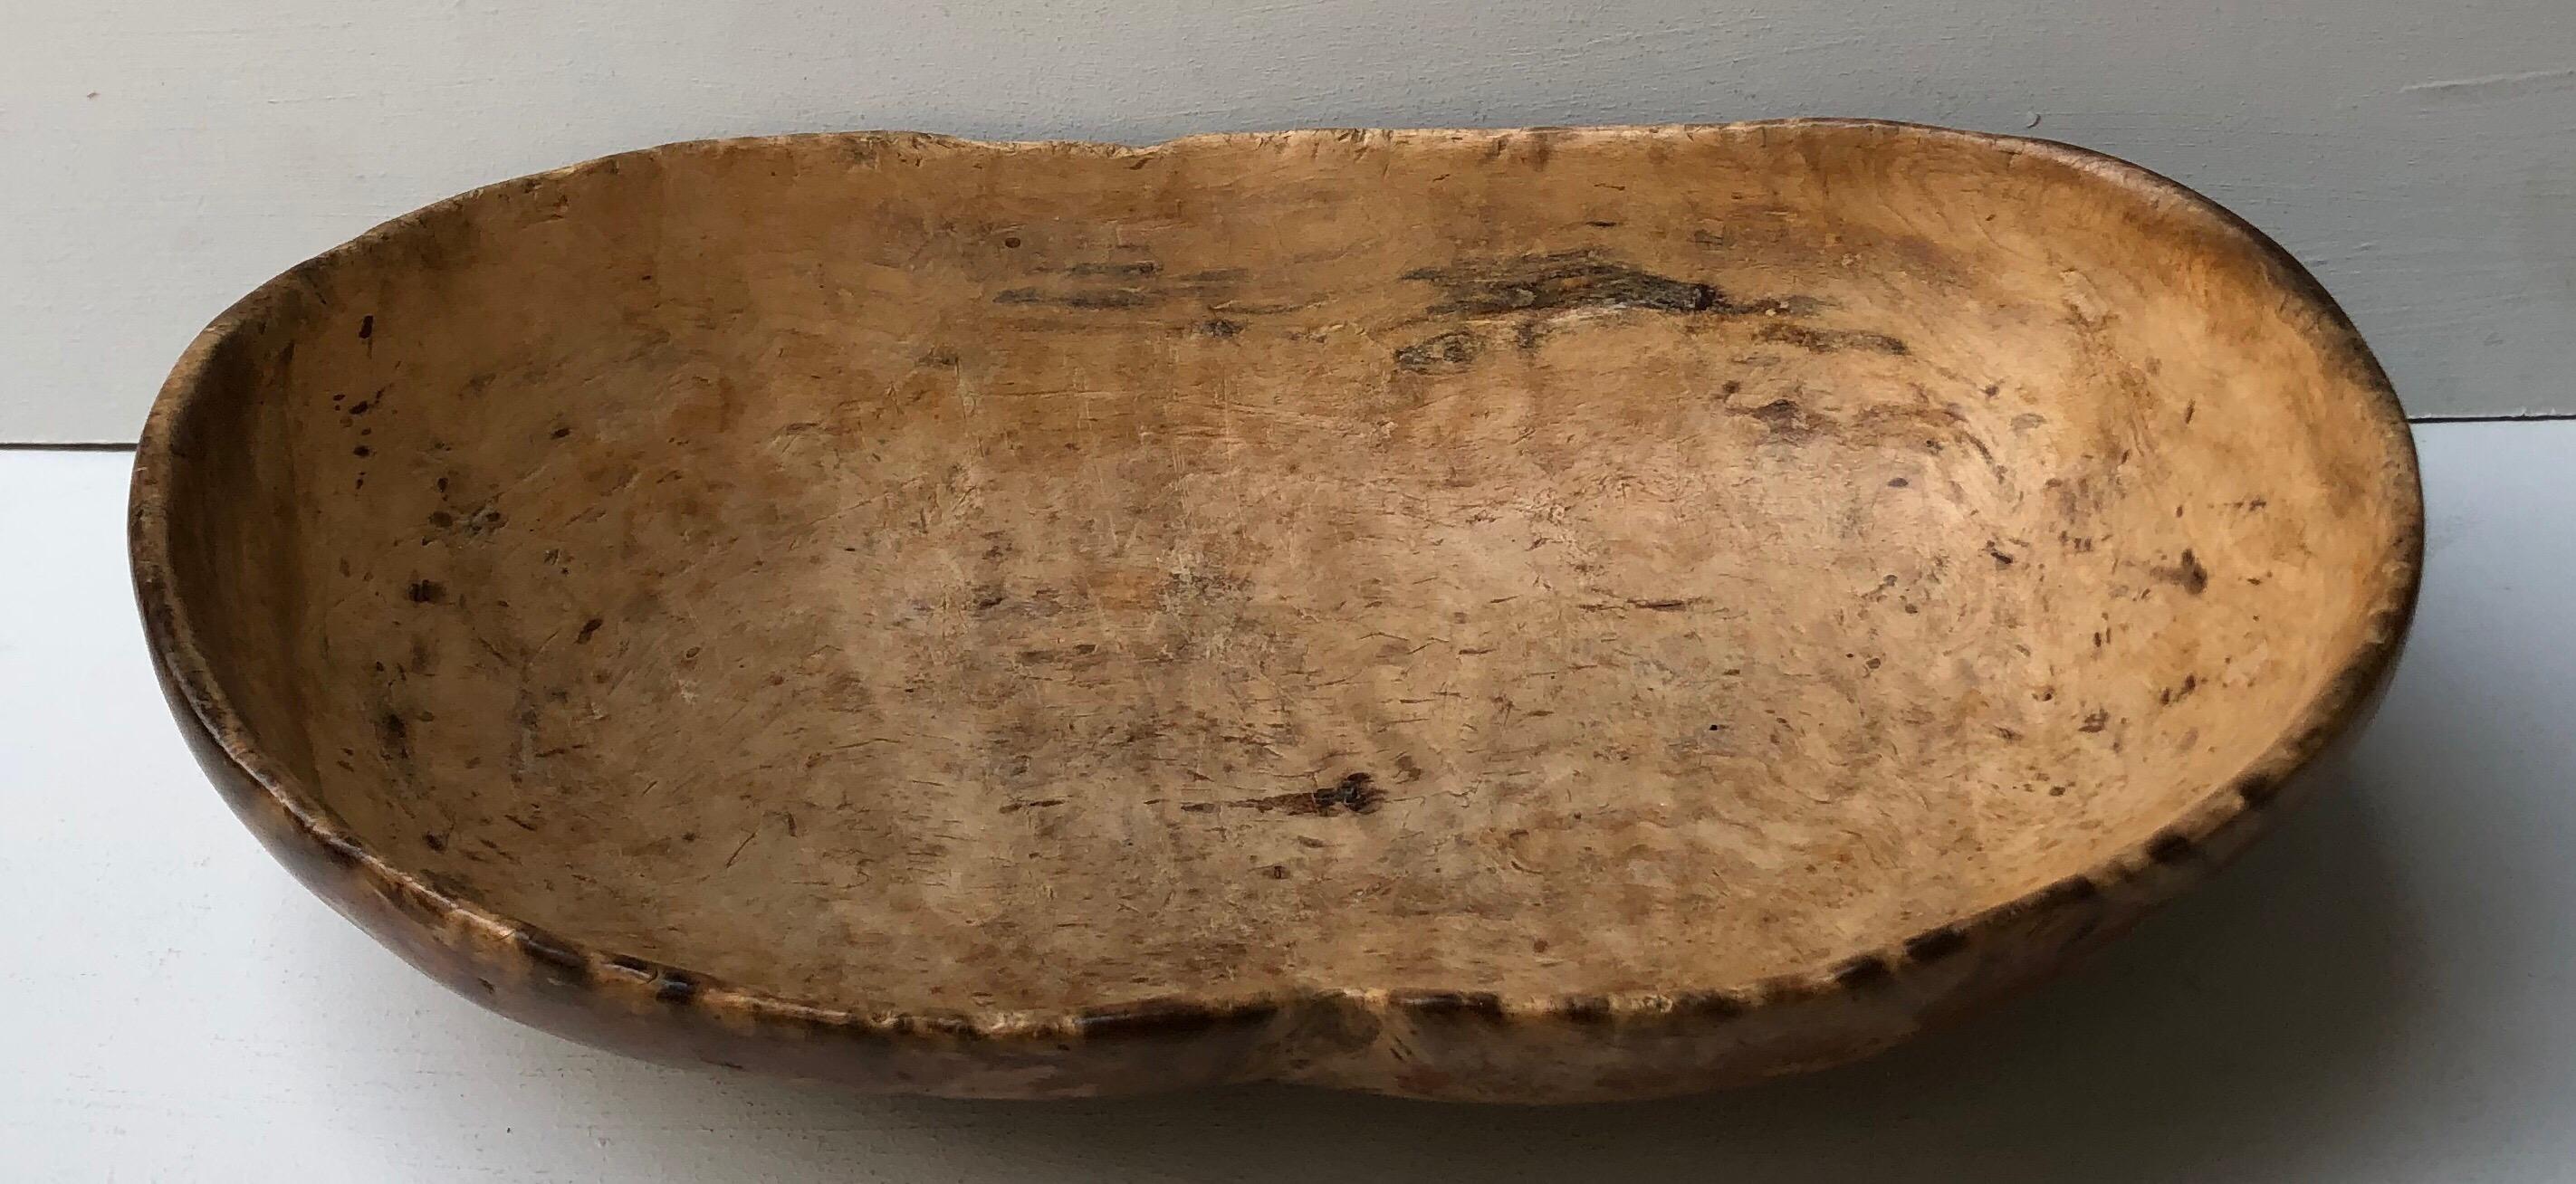 Fine early 19th century Swedish root burl bowl retaining traces of original mustard and ox blood read paint and having lovely organic form with excellent patina.